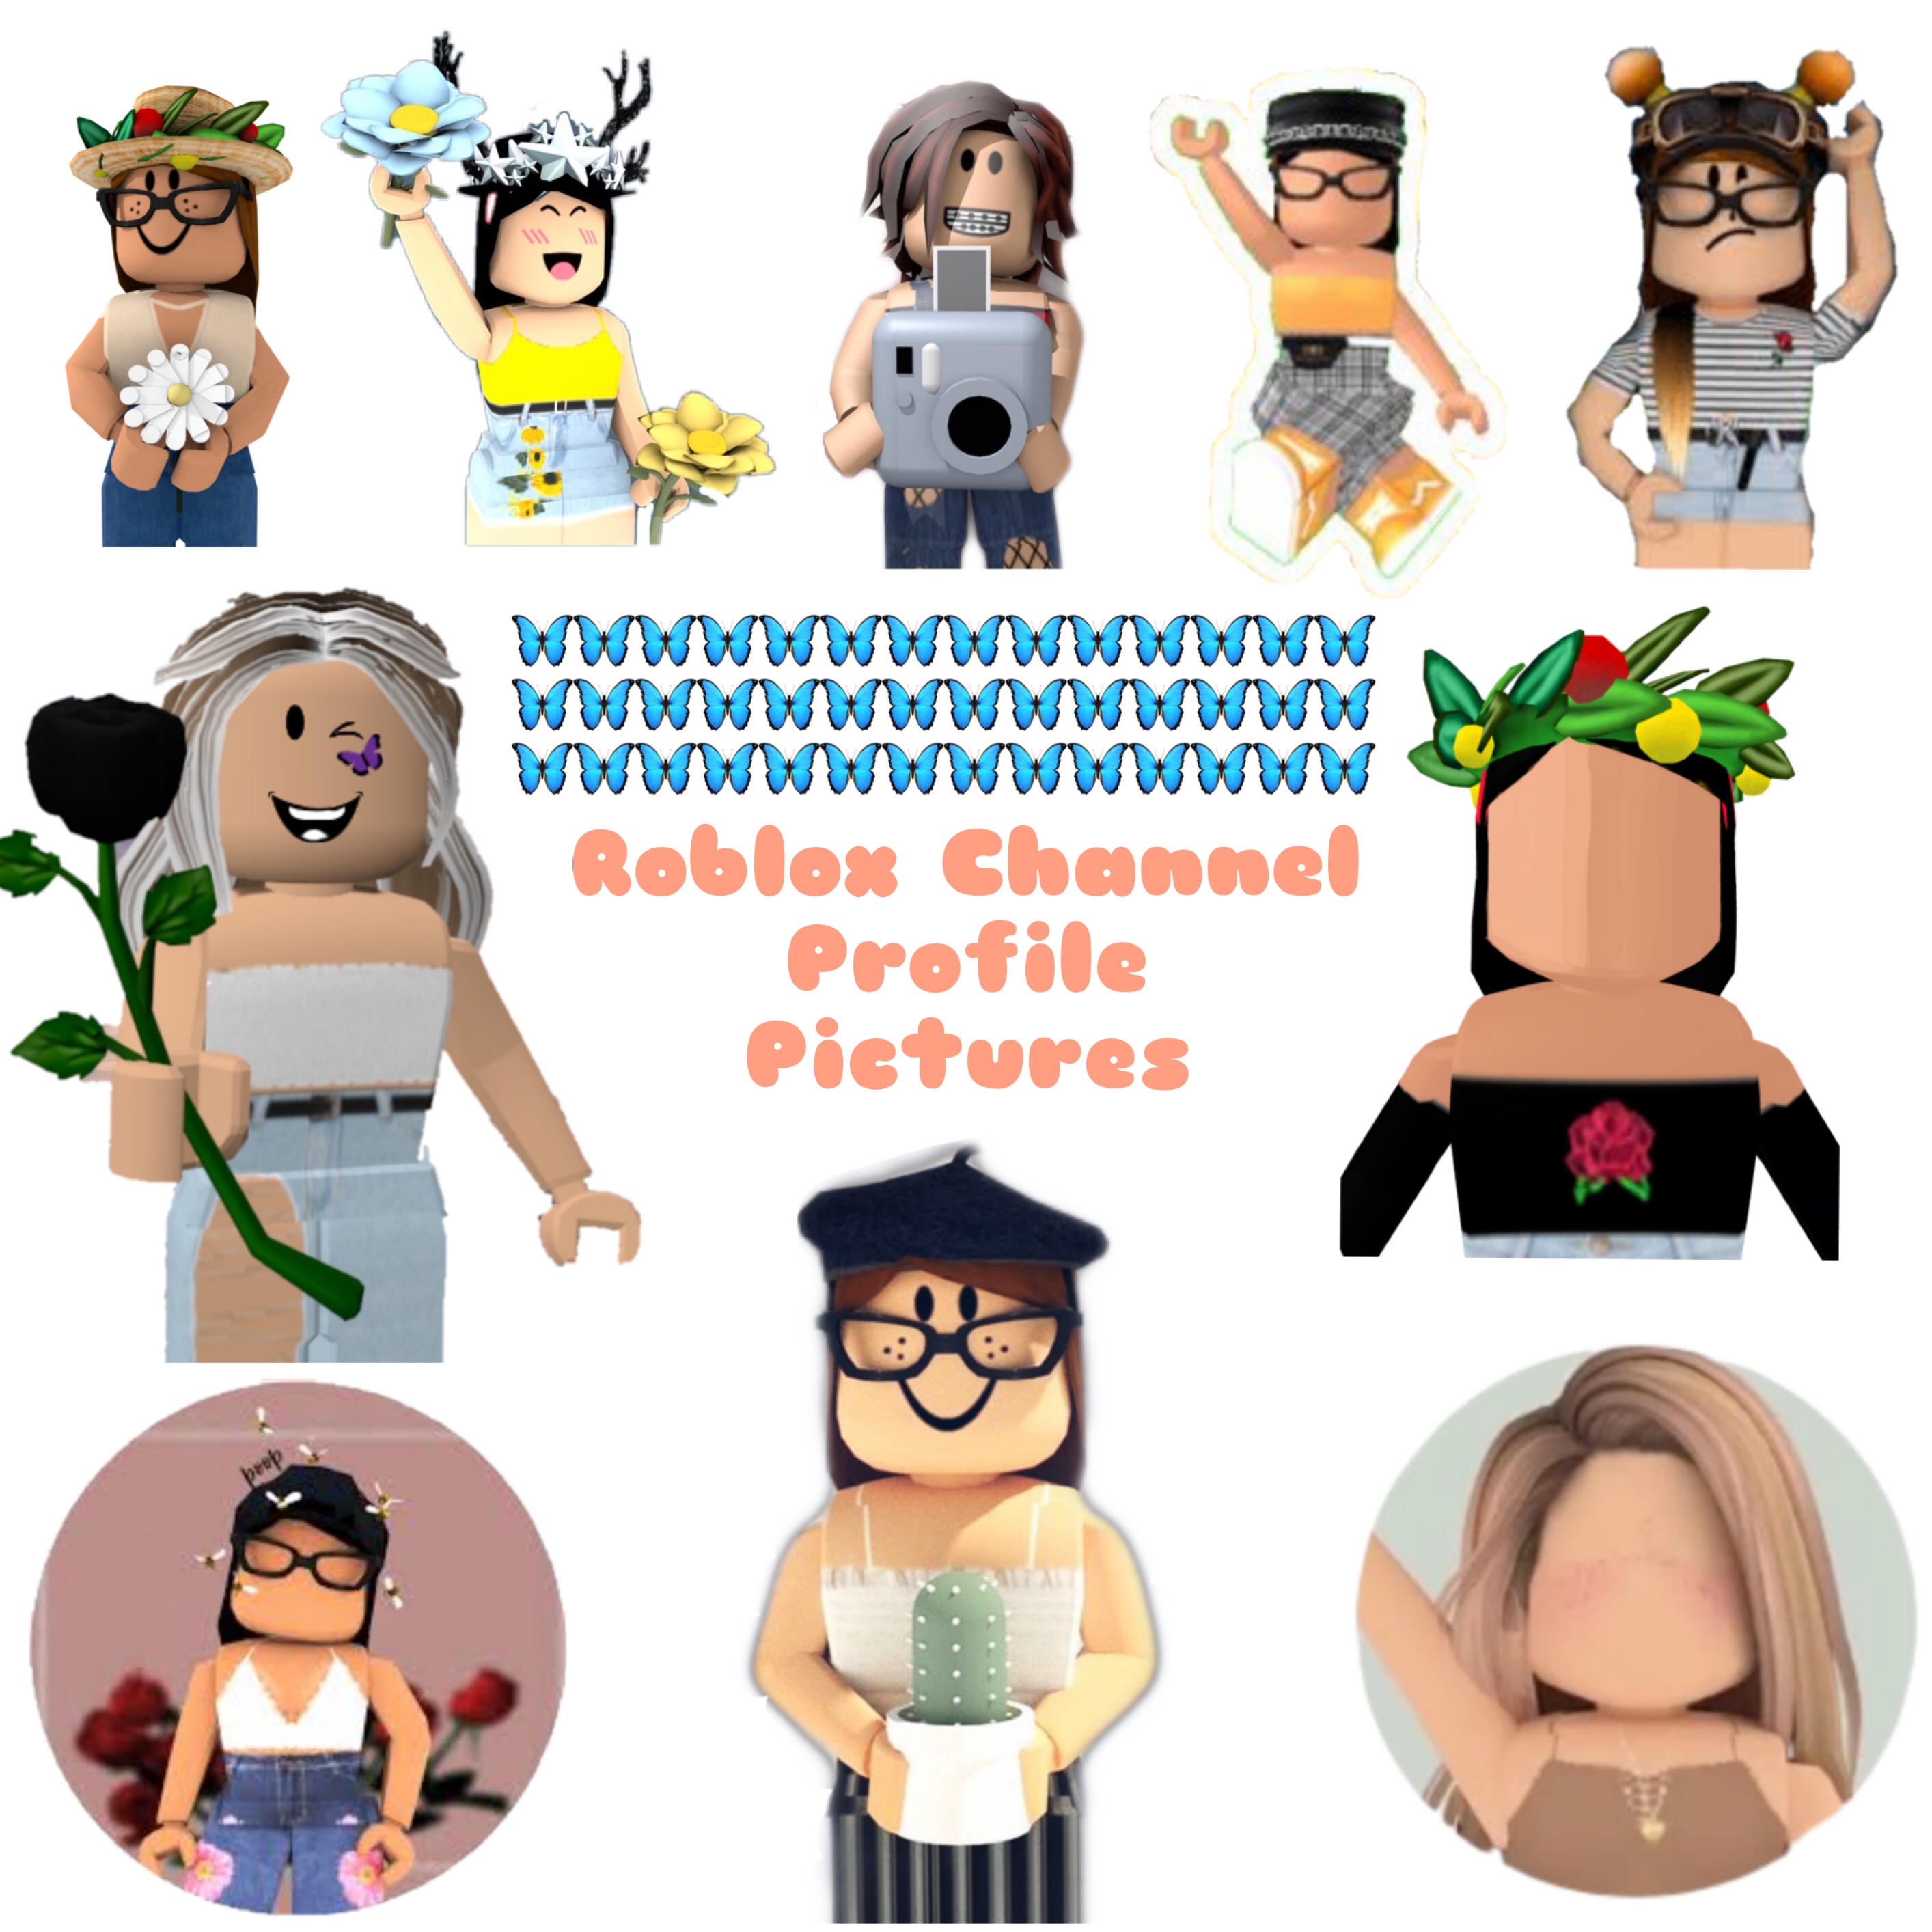 Image By 𝘆𝗼𝘂 𝗿𝗲 𝗺𝘆 𝗺𝗼𝗼𝗻𝗹𝗶𝗴𝗵𝘁 - roblox channel